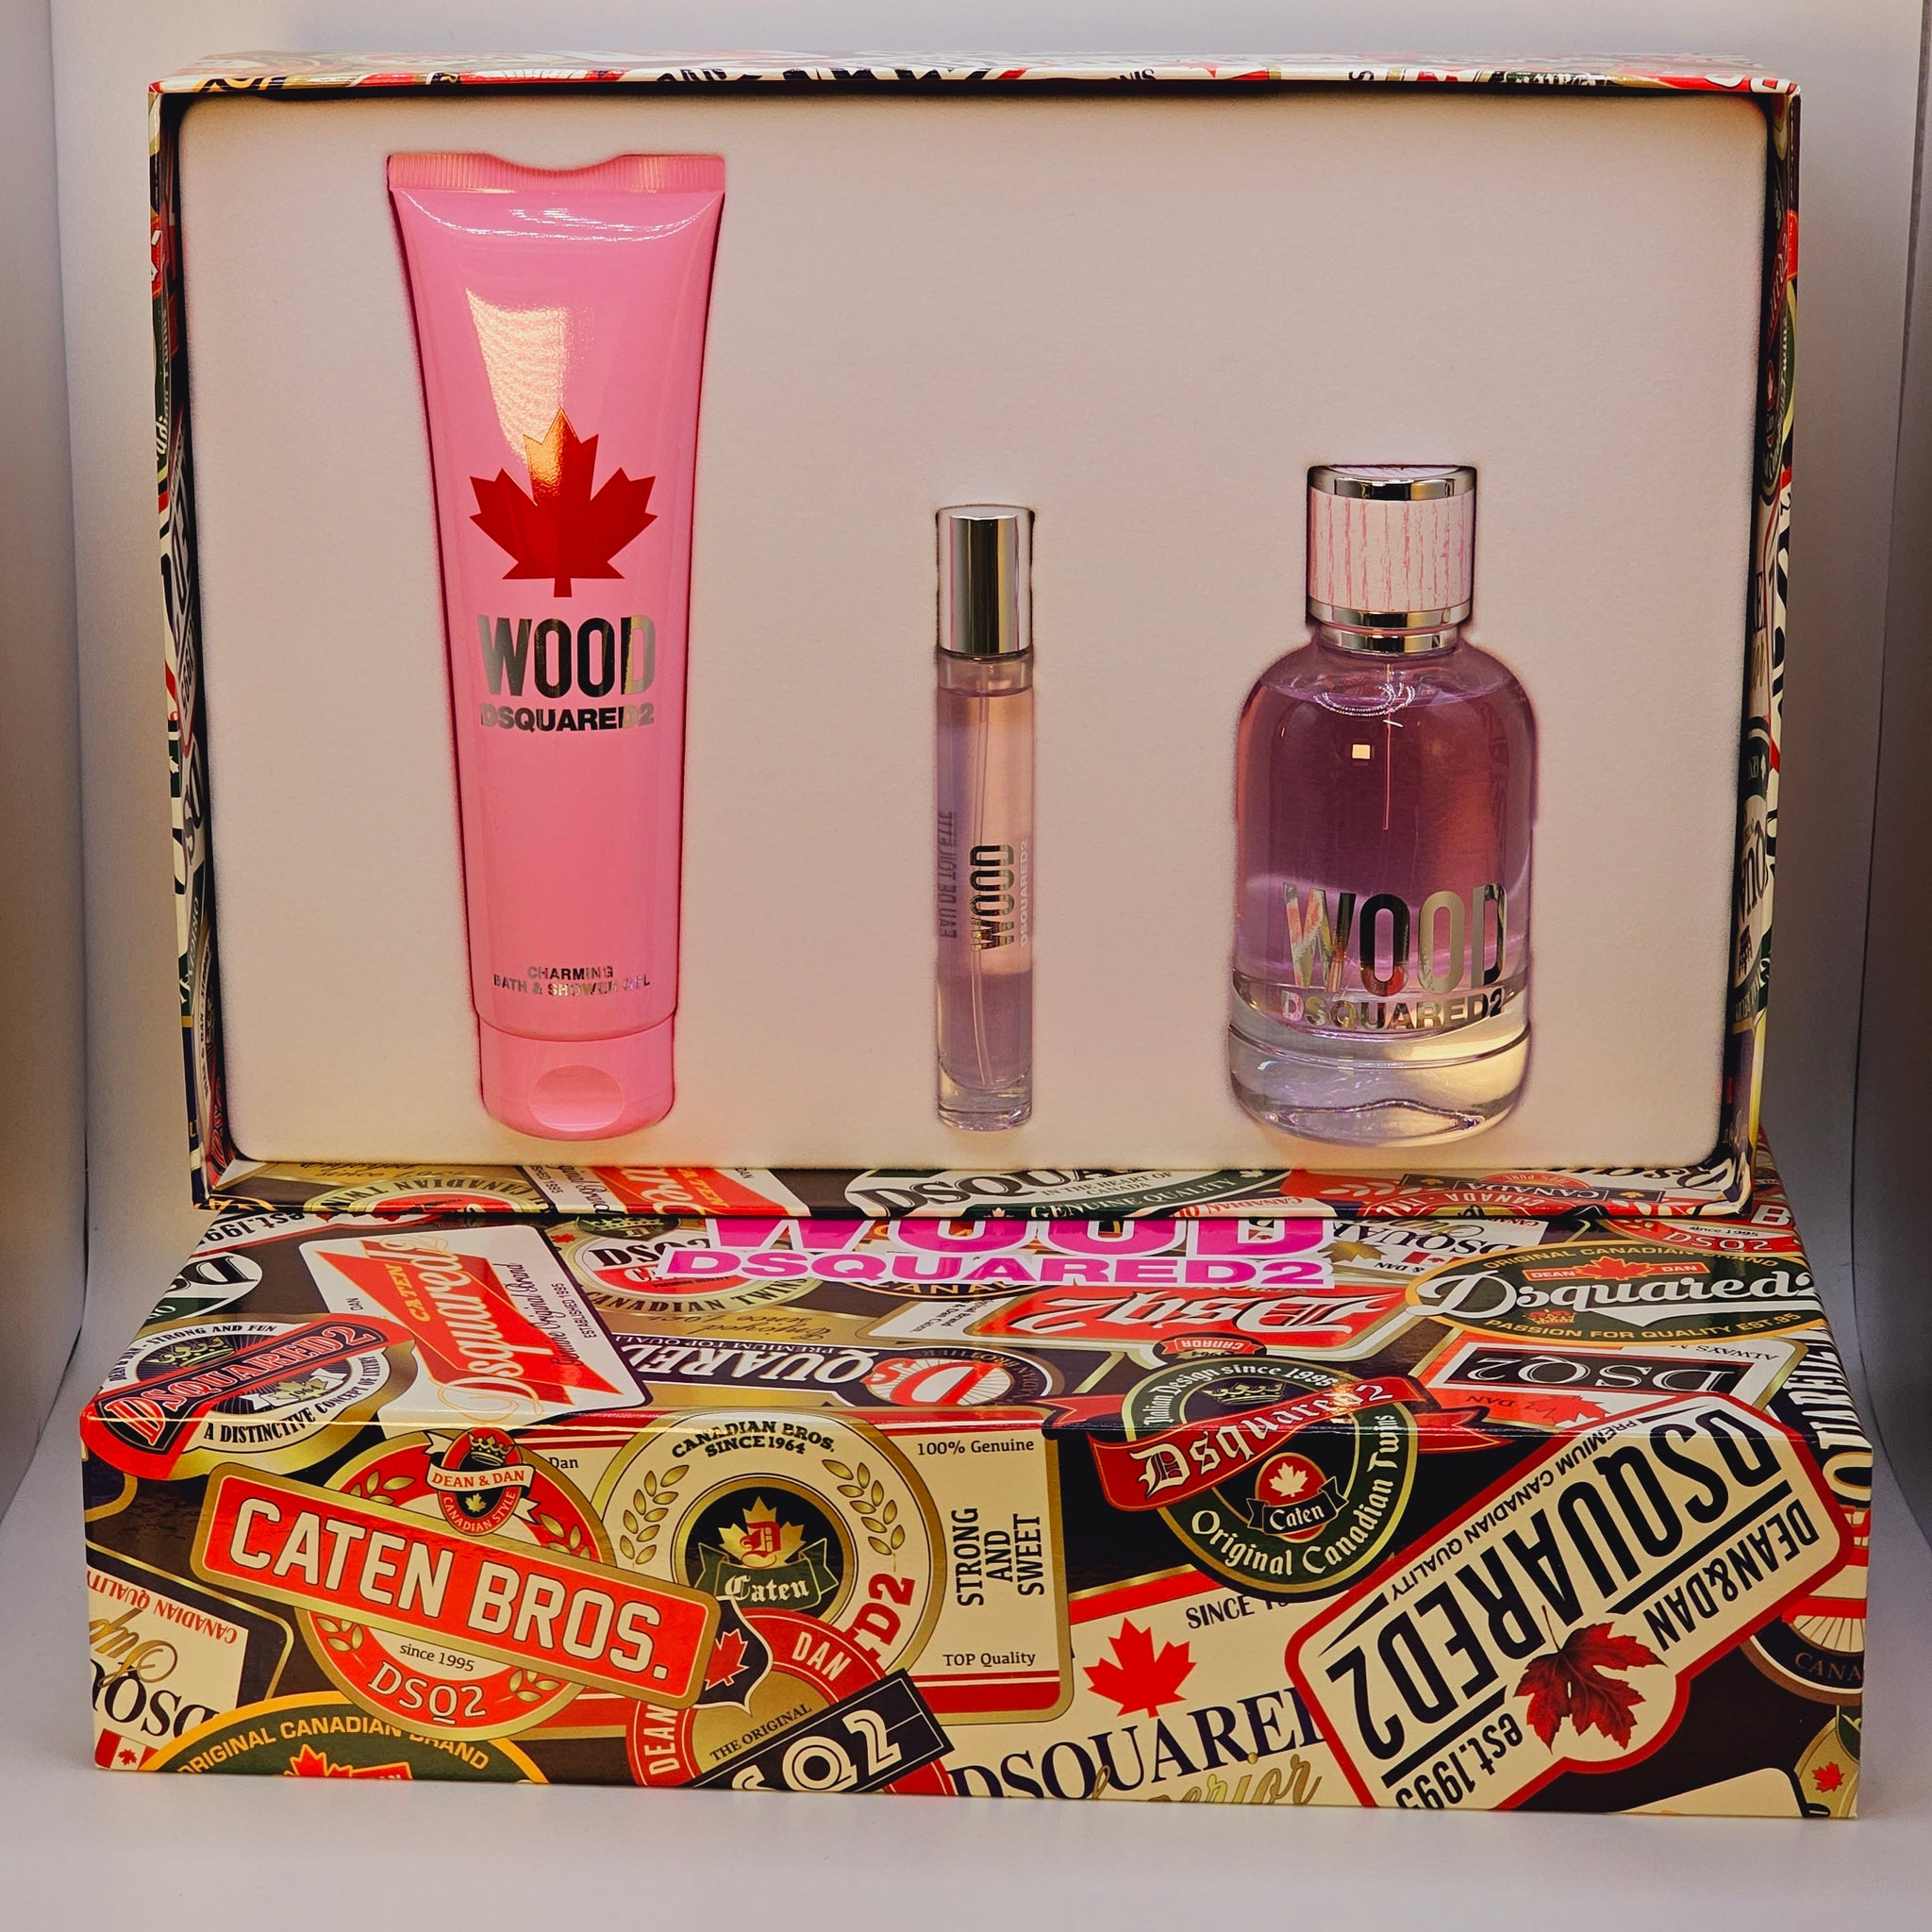 Wood Pour Femme By Dsquared2 For Women - 3 Pc Gift Set - 3.4 Oz Floral Fruity